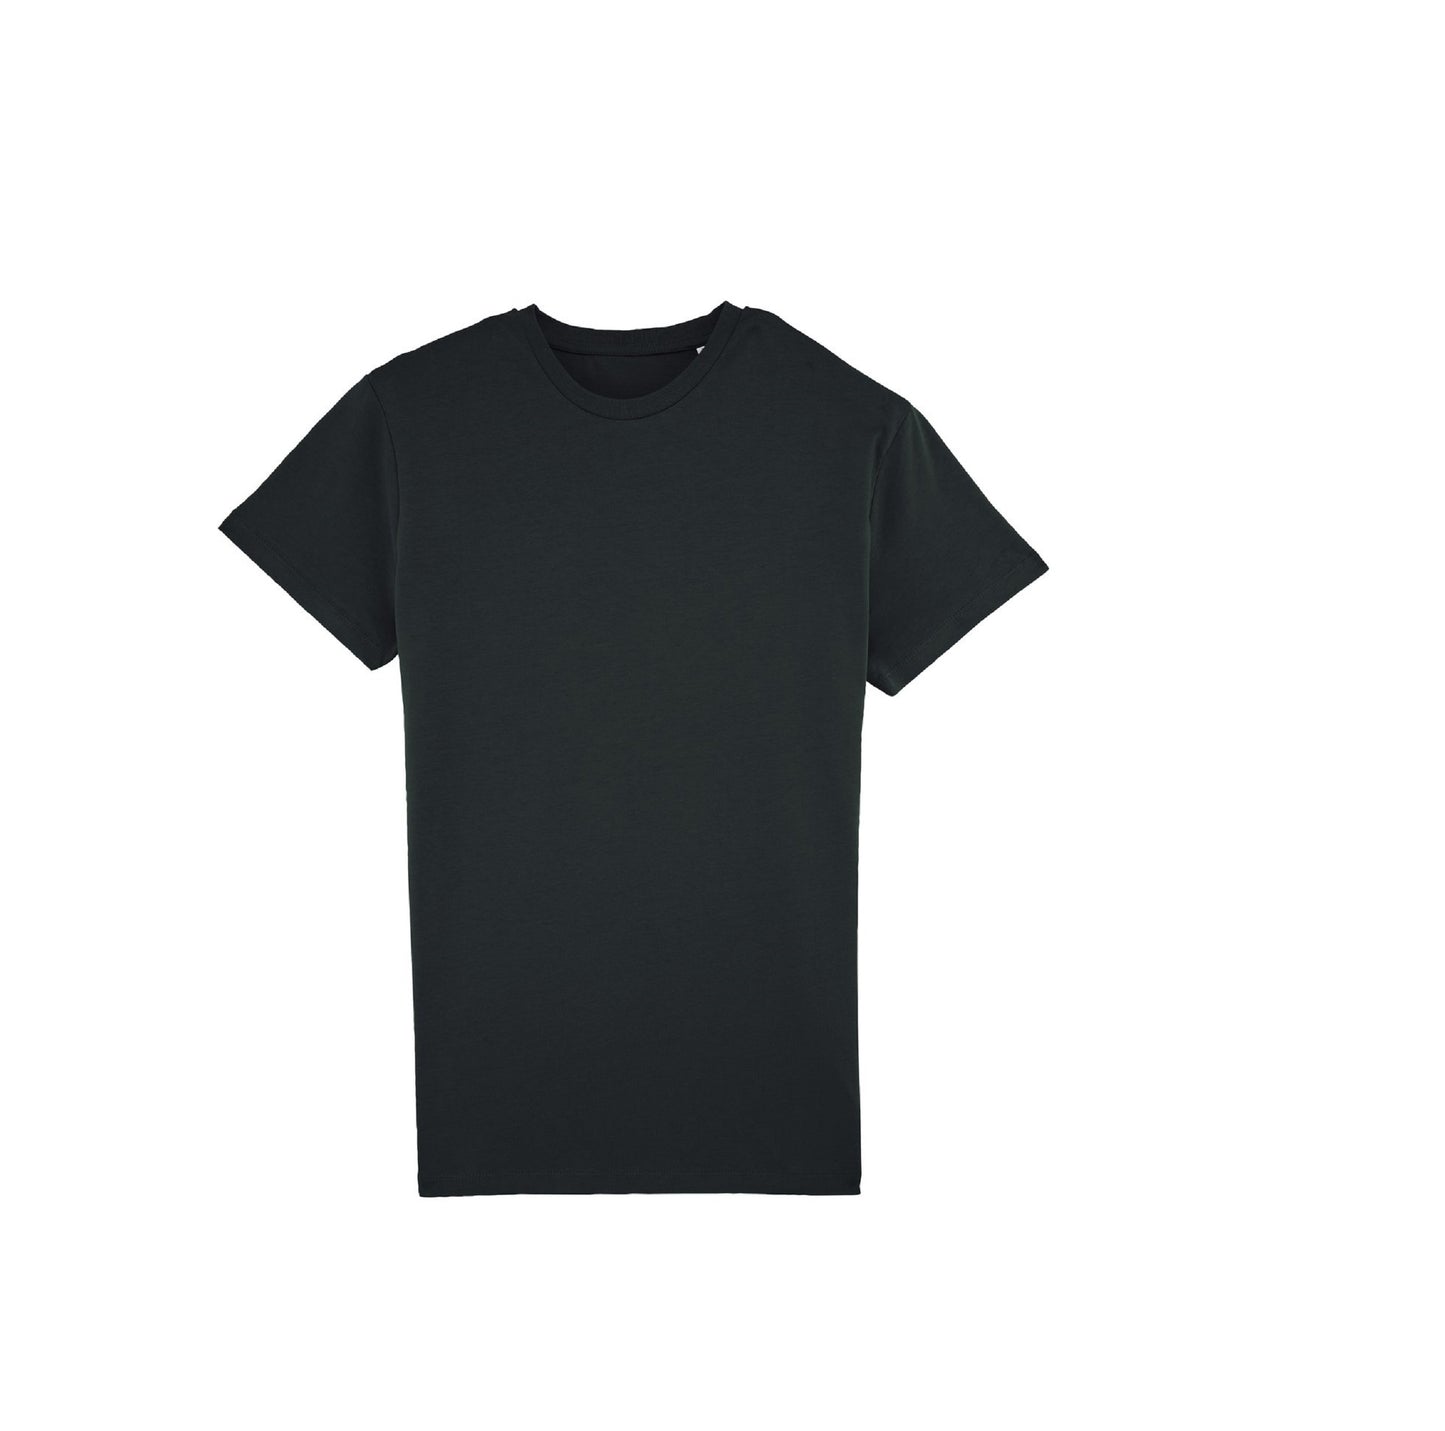 The Organic Cotton Men's Fitted T-Shirt